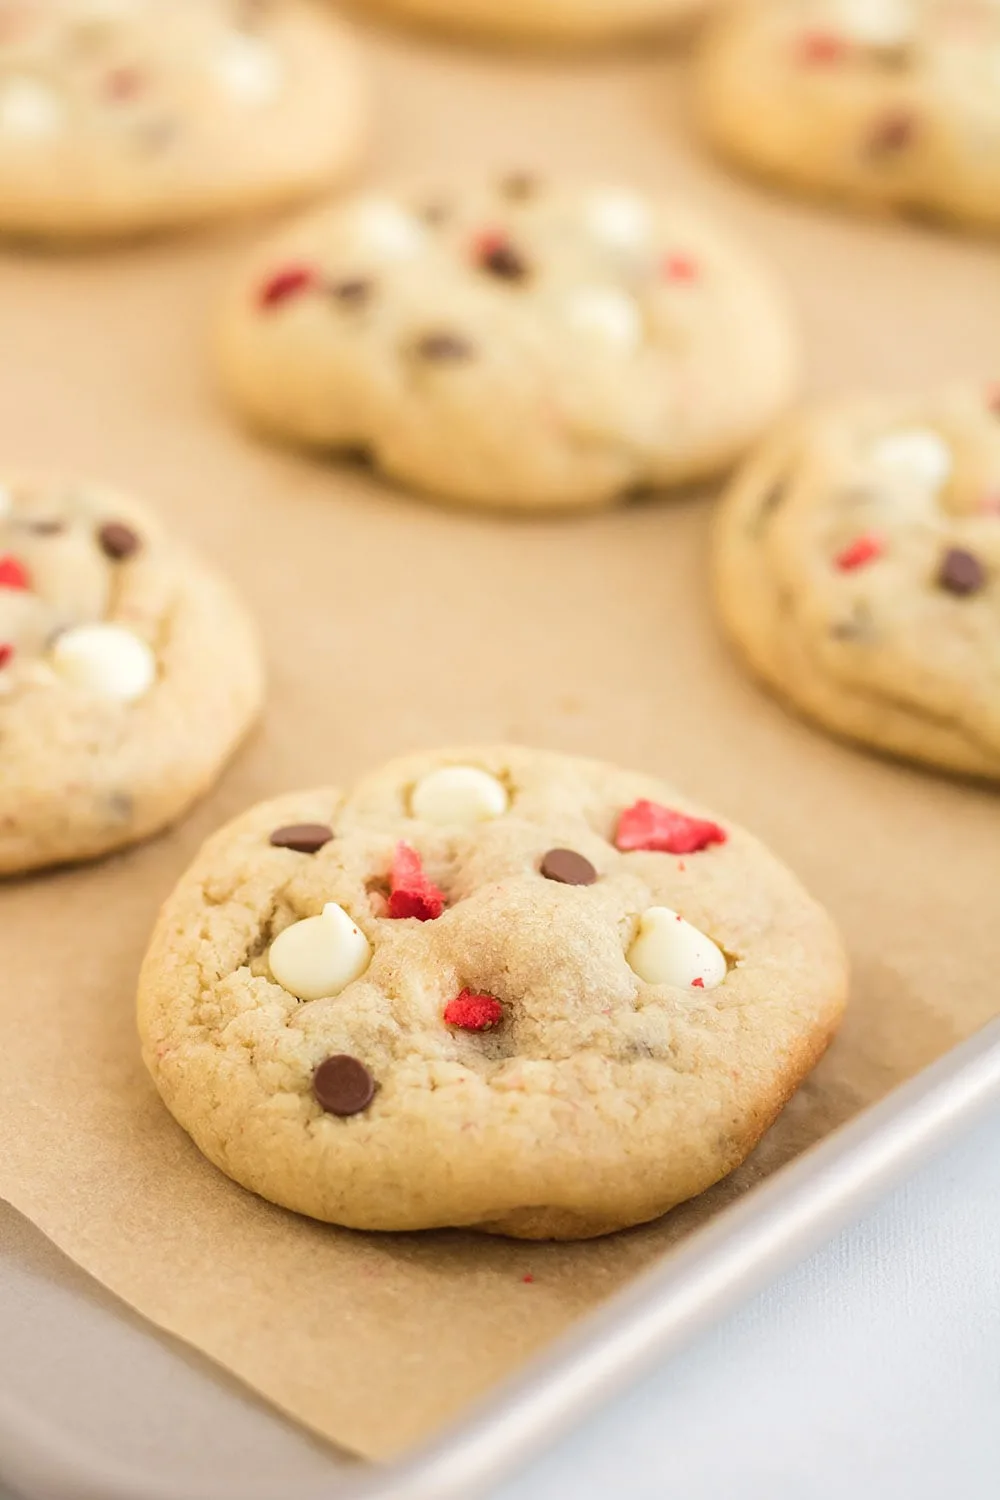 Baked cookies on sheet.